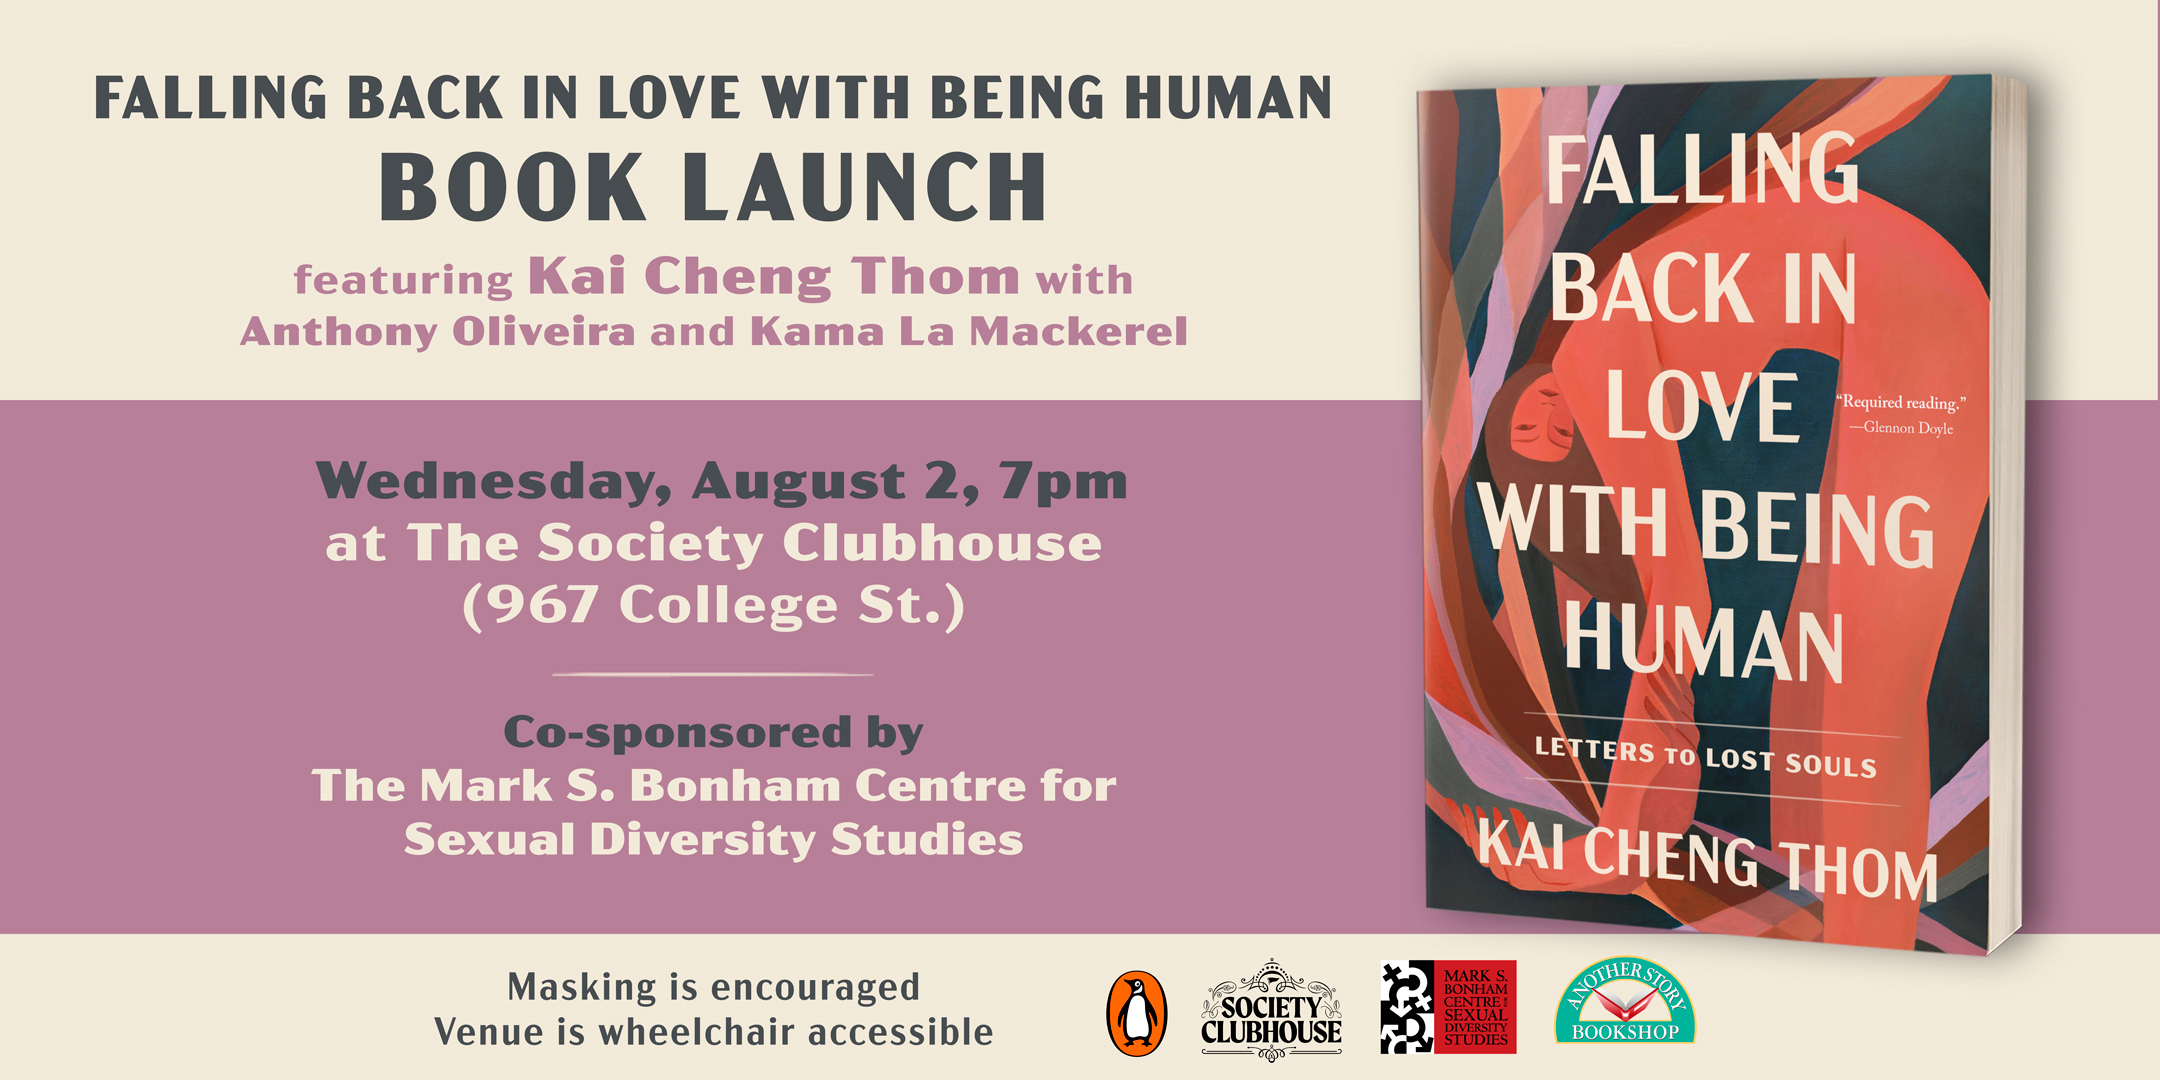 Kai Cheng Thom Book Launch for "Falling Back In Love with Being Human"